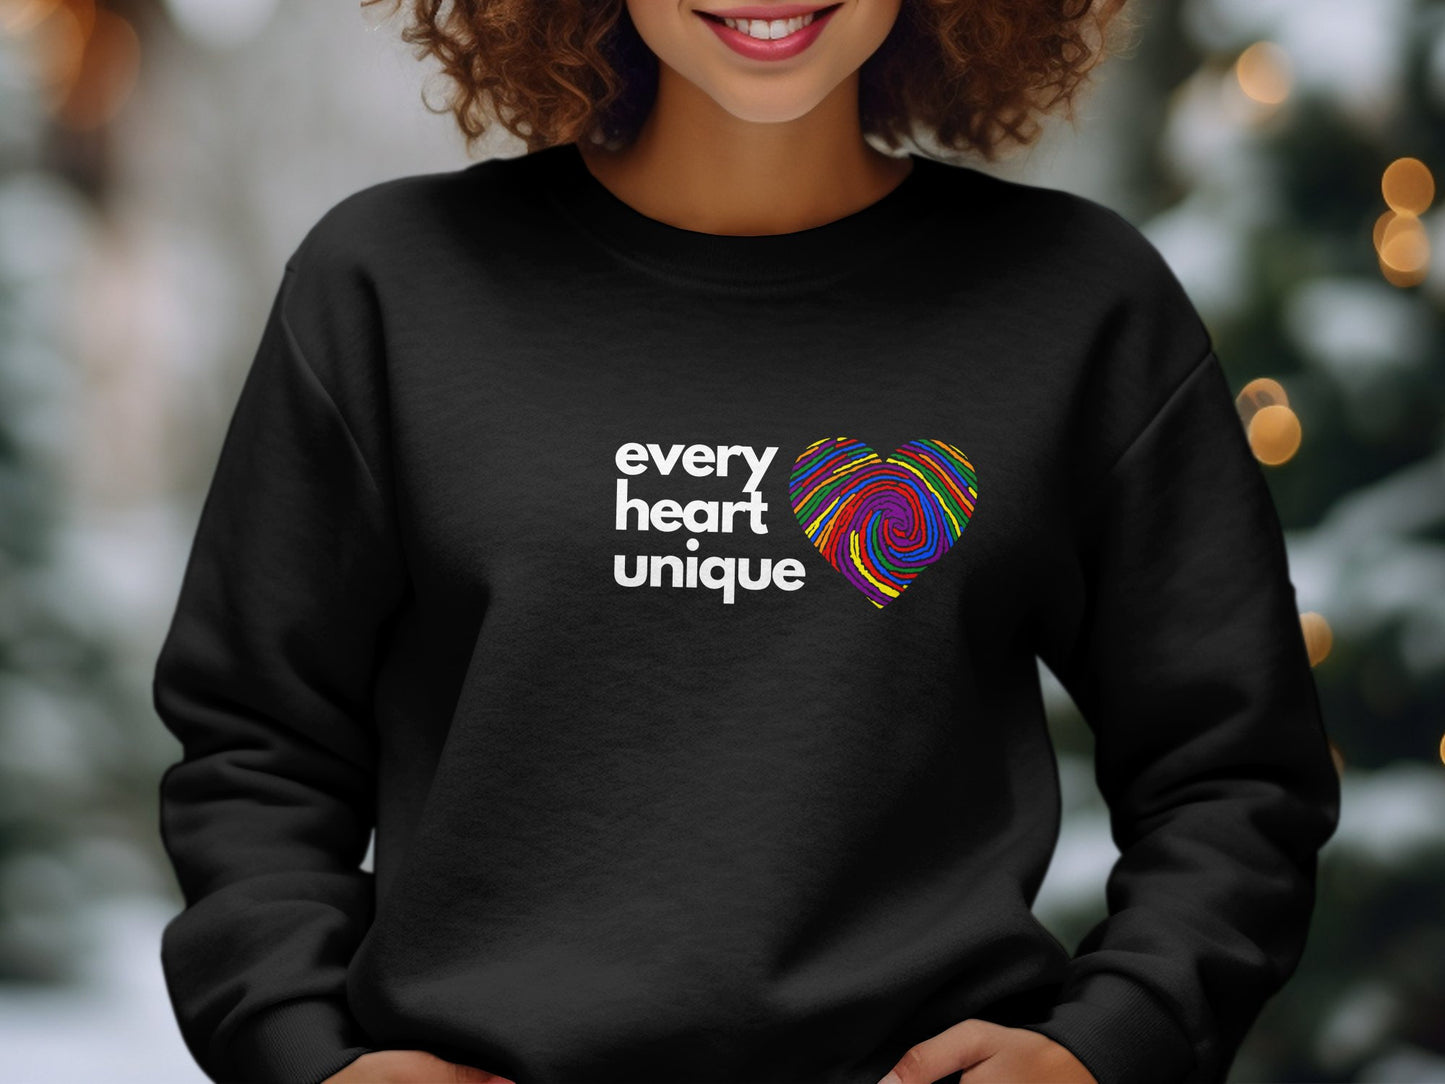 Every Heart is Unique Shirt - Love and Hope Human Tee, IVF gifts, infertility tee, infertility struggles, not every heart is broken tee